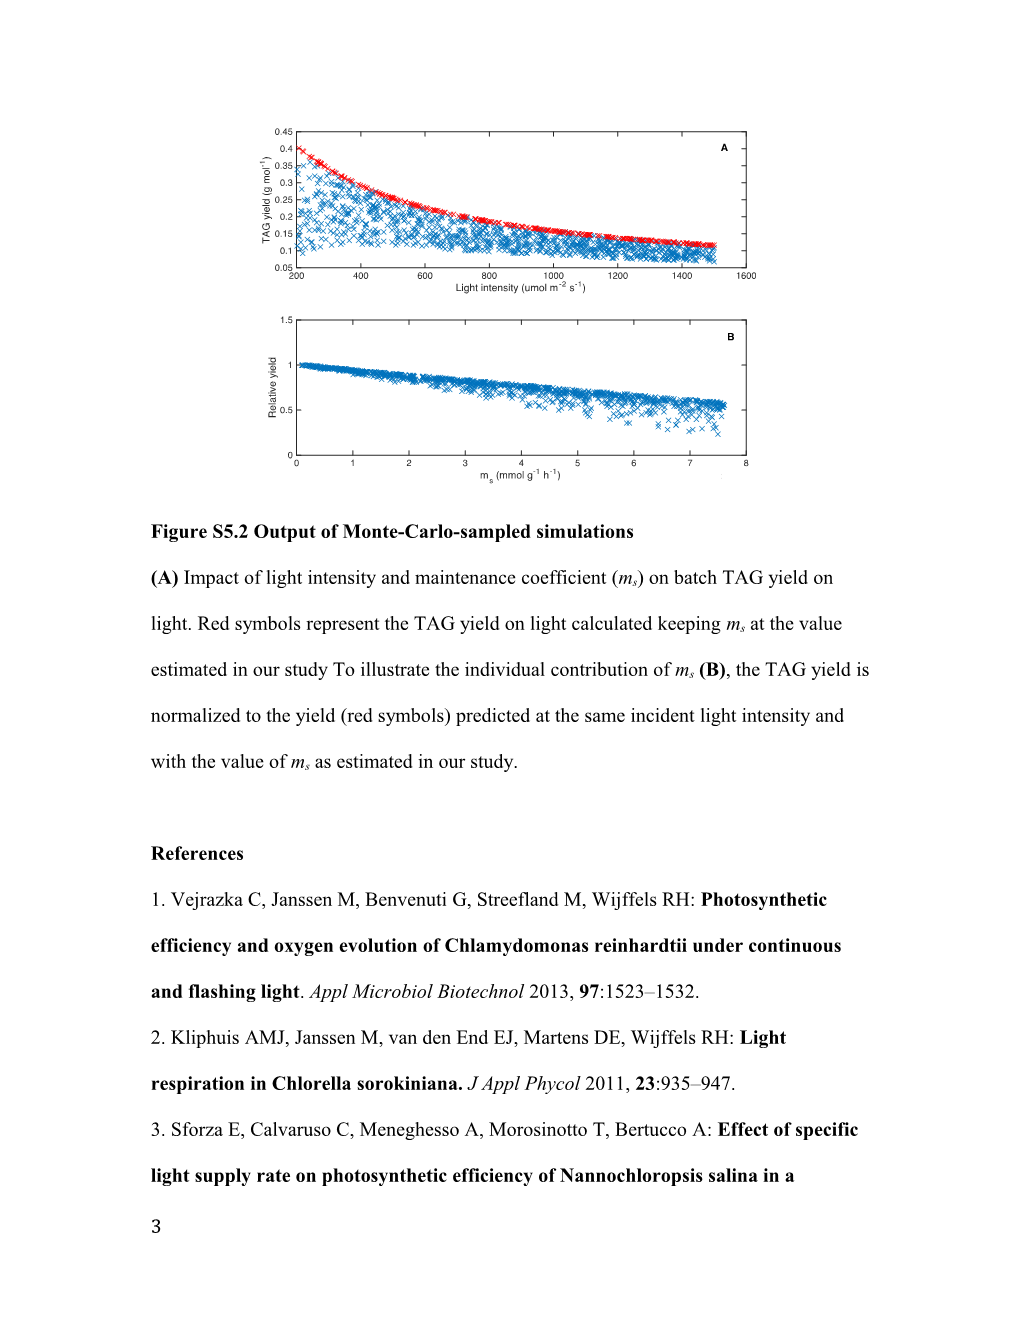 Additional File 5Impact of Maintenance Coefficient on Accuracy of Model Predictions